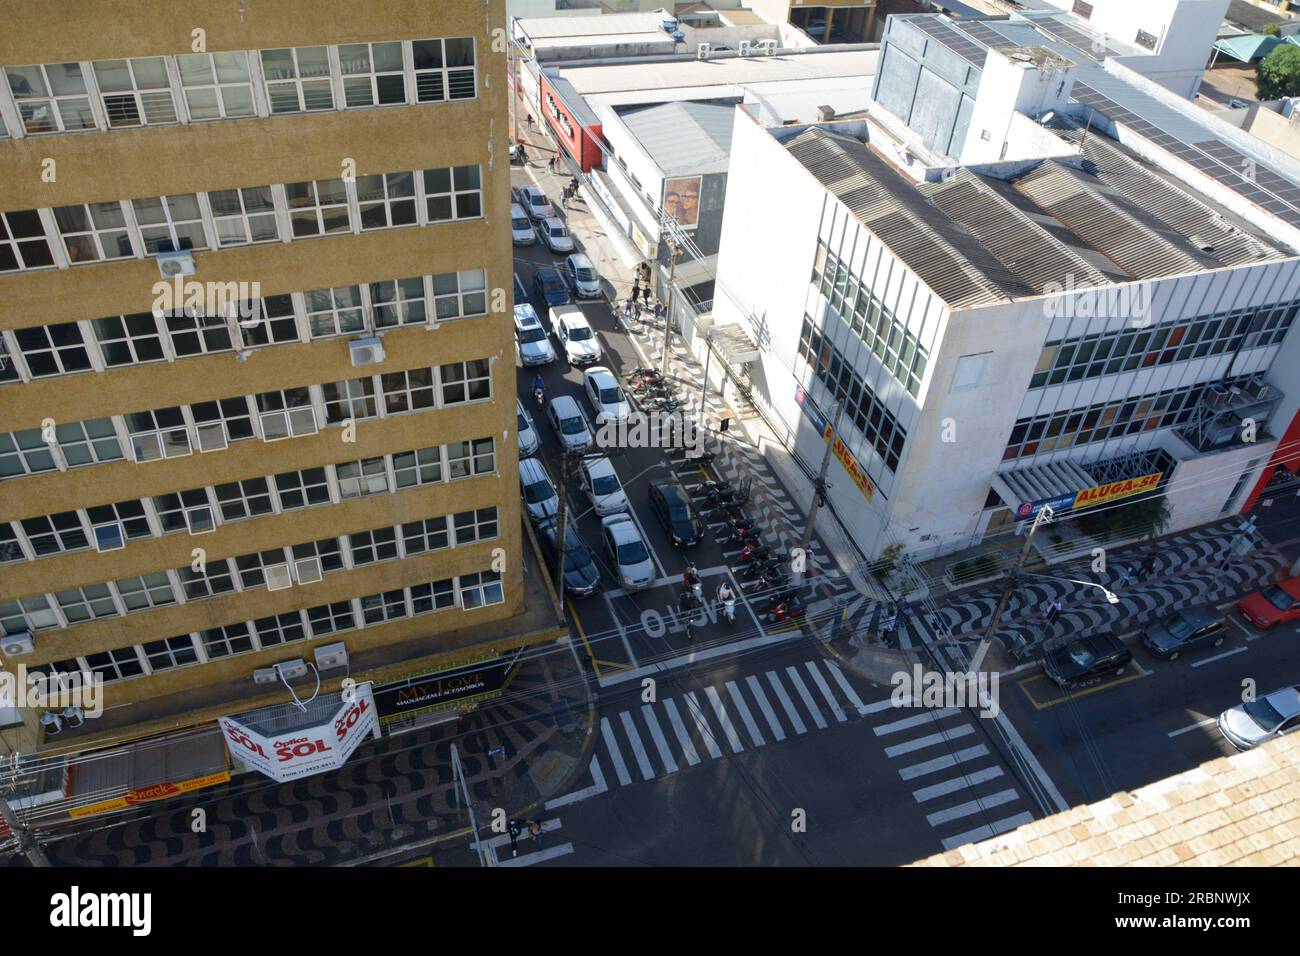 Crossing of a street and avenue in the interior of São Paulo, with an aerial view highlighting vehicles and horizontal signage Stock Photo